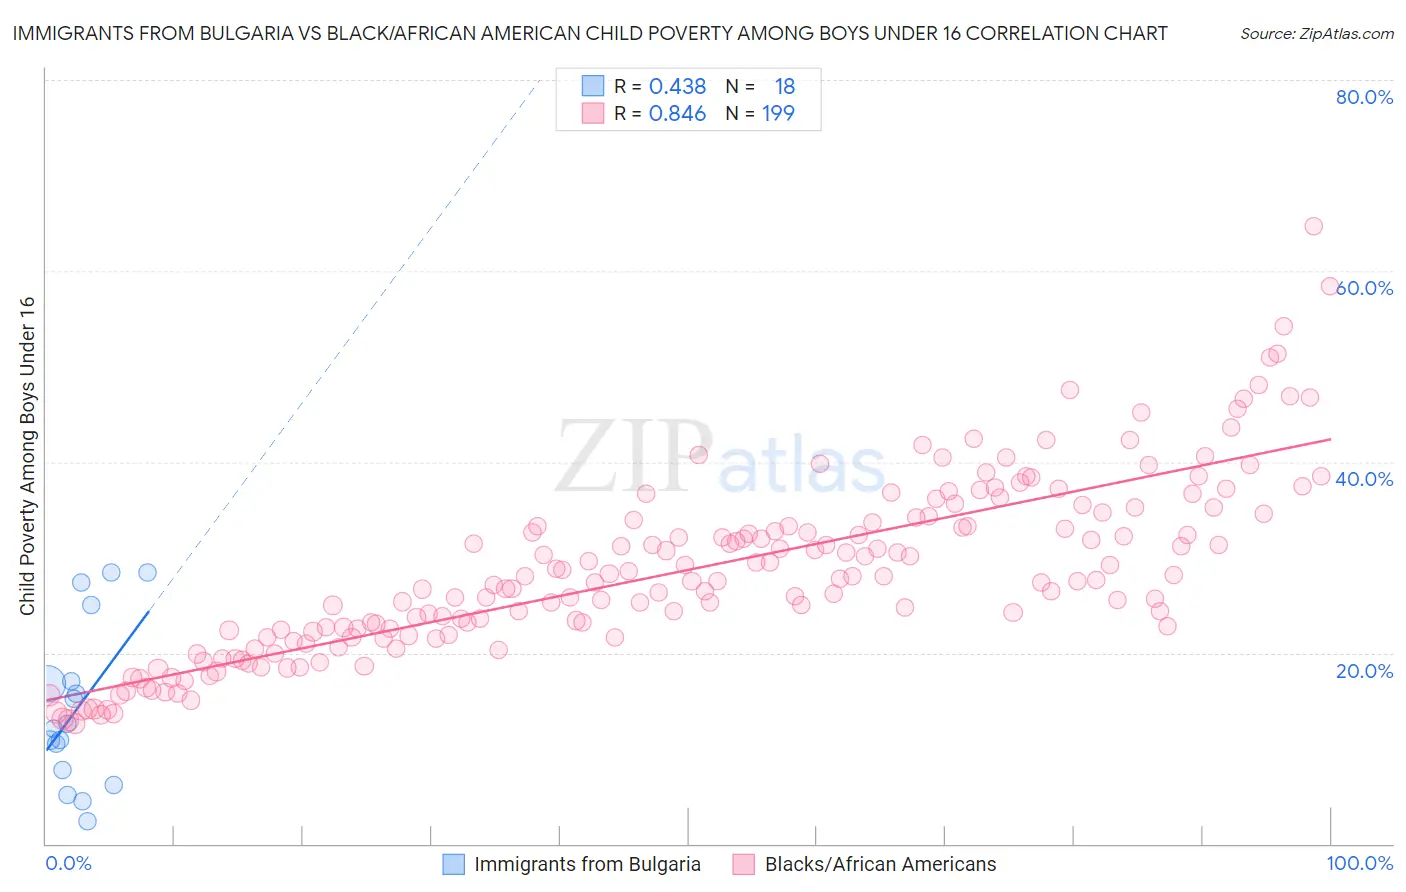 Immigrants from Bulgaria vs Black/African American Child Poverty Among Boys Under 16